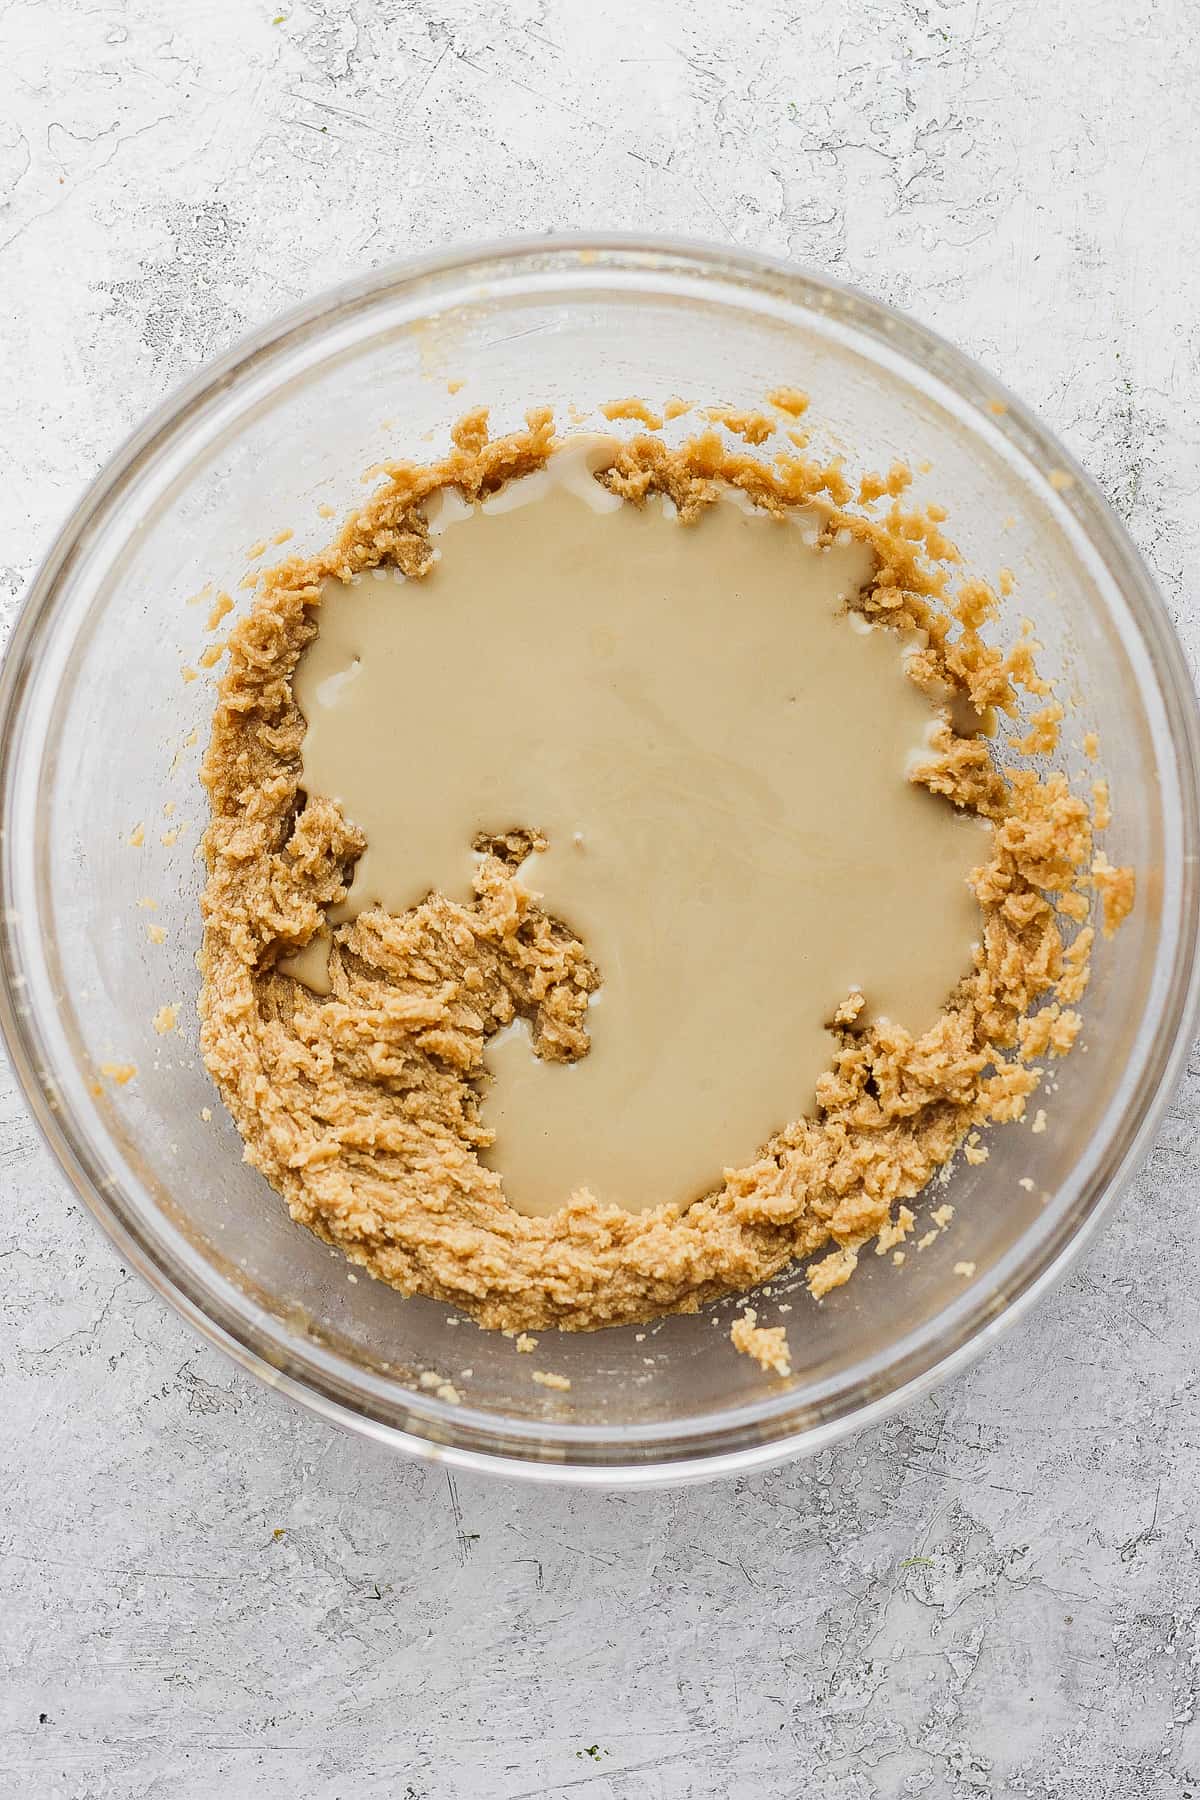 https://fitfoodiefinds.com/wp-content/uploads/2023/06/Tahini-Cookies-08.jpg